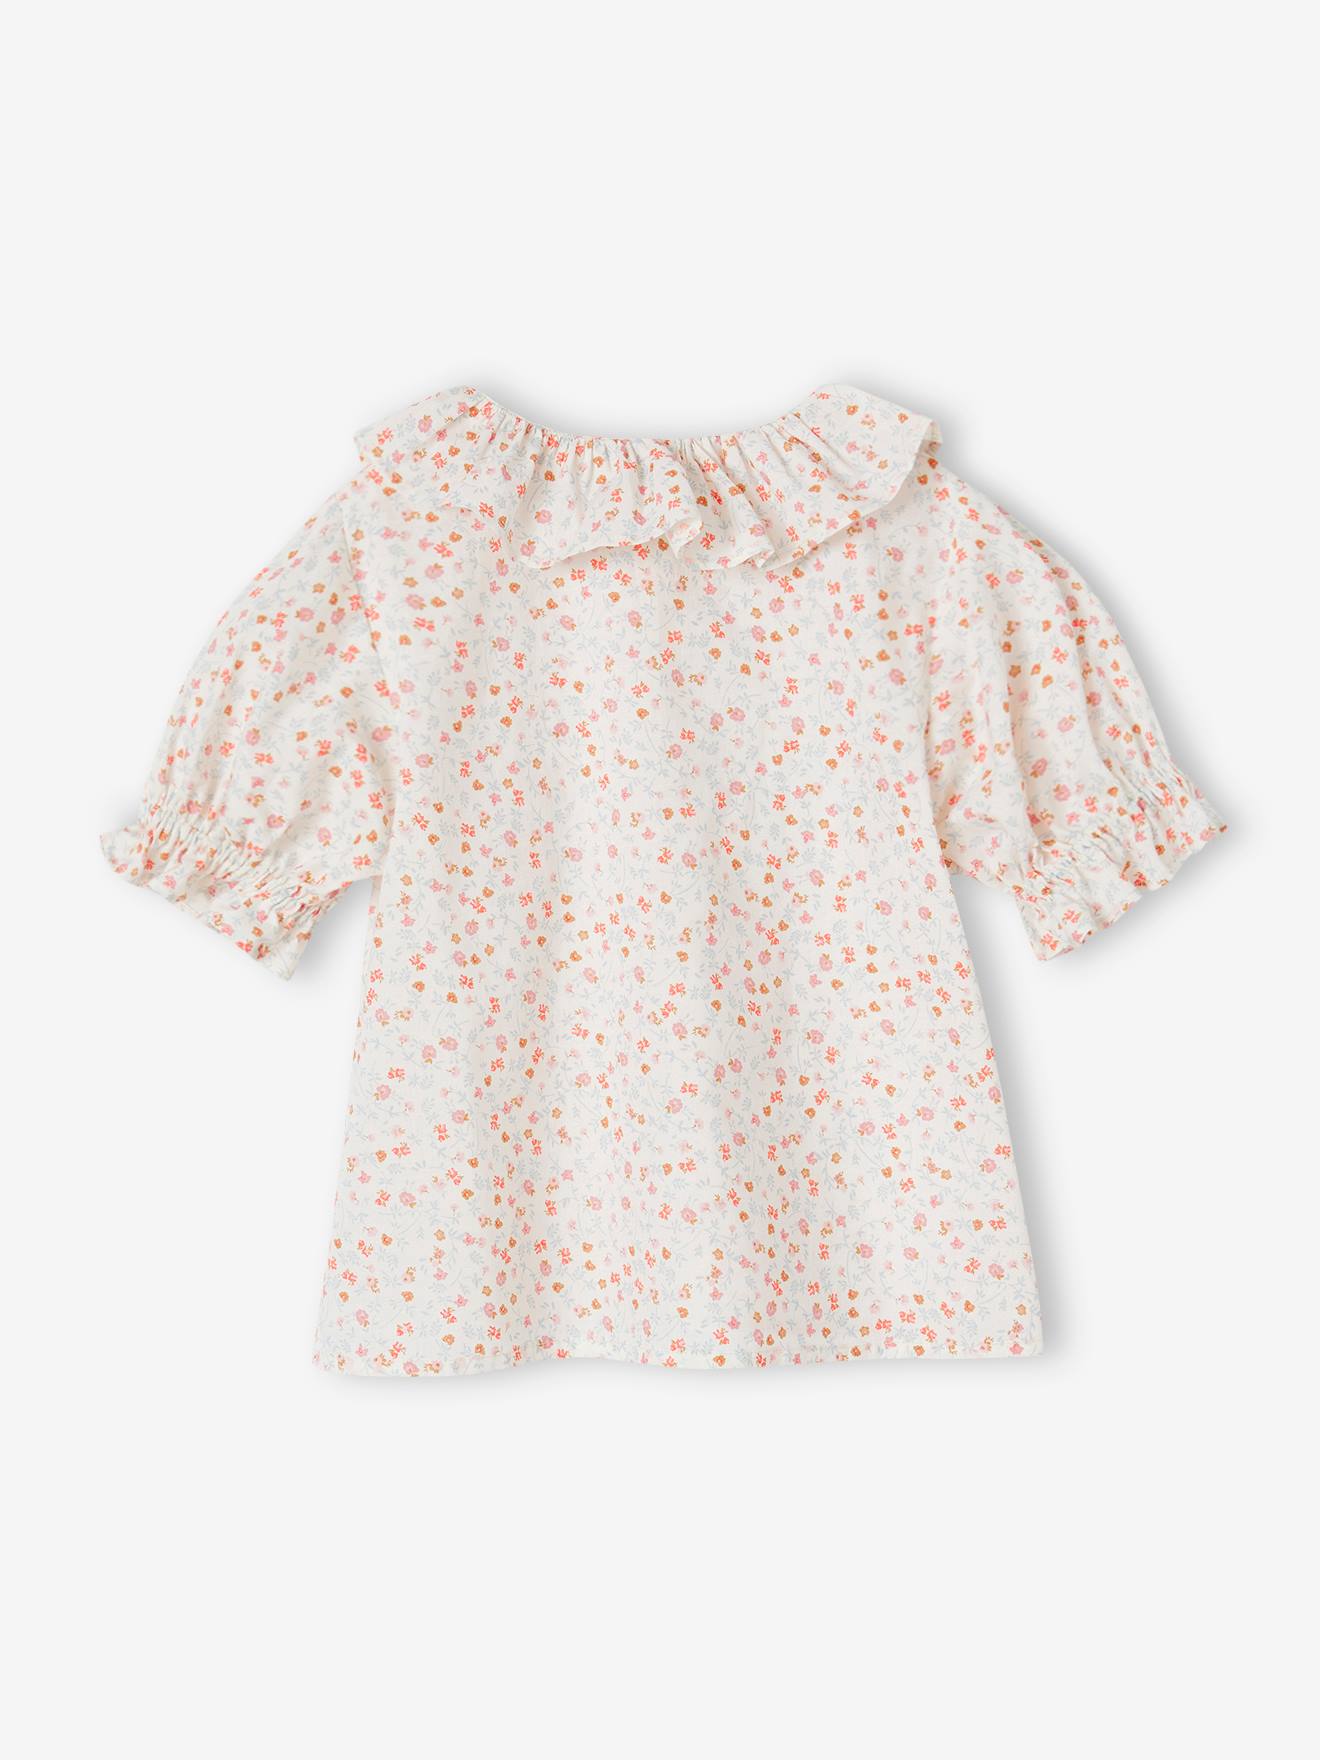 Blouse in Cotton Gauze with Frilled Collar, for Girls ecru